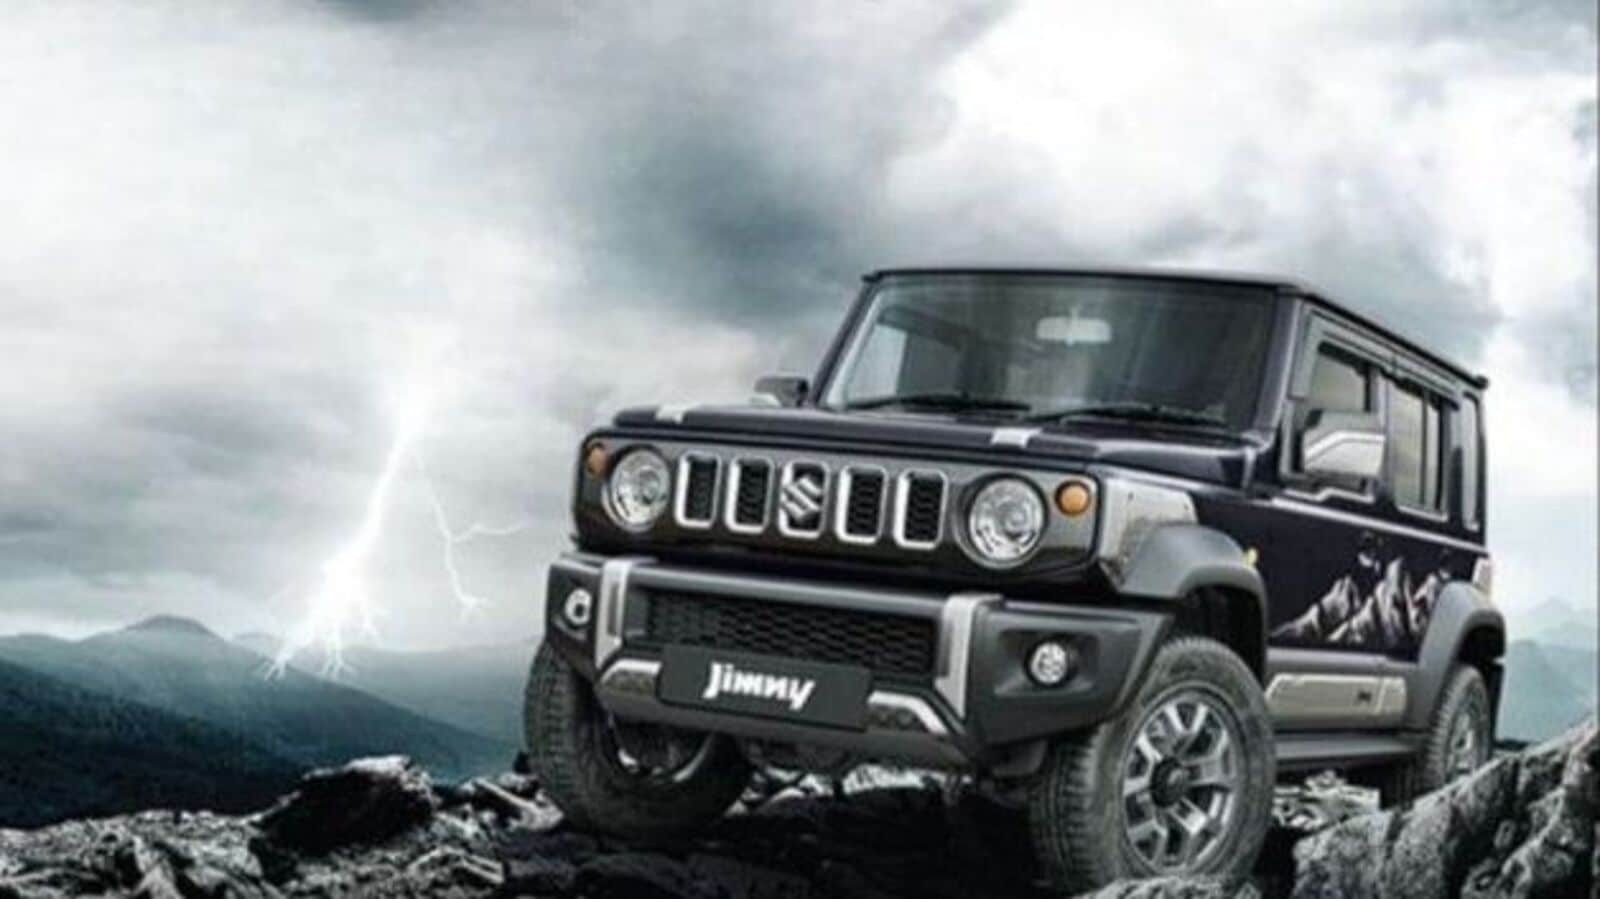 Maruti Jimny Official accessories and prices [Video]